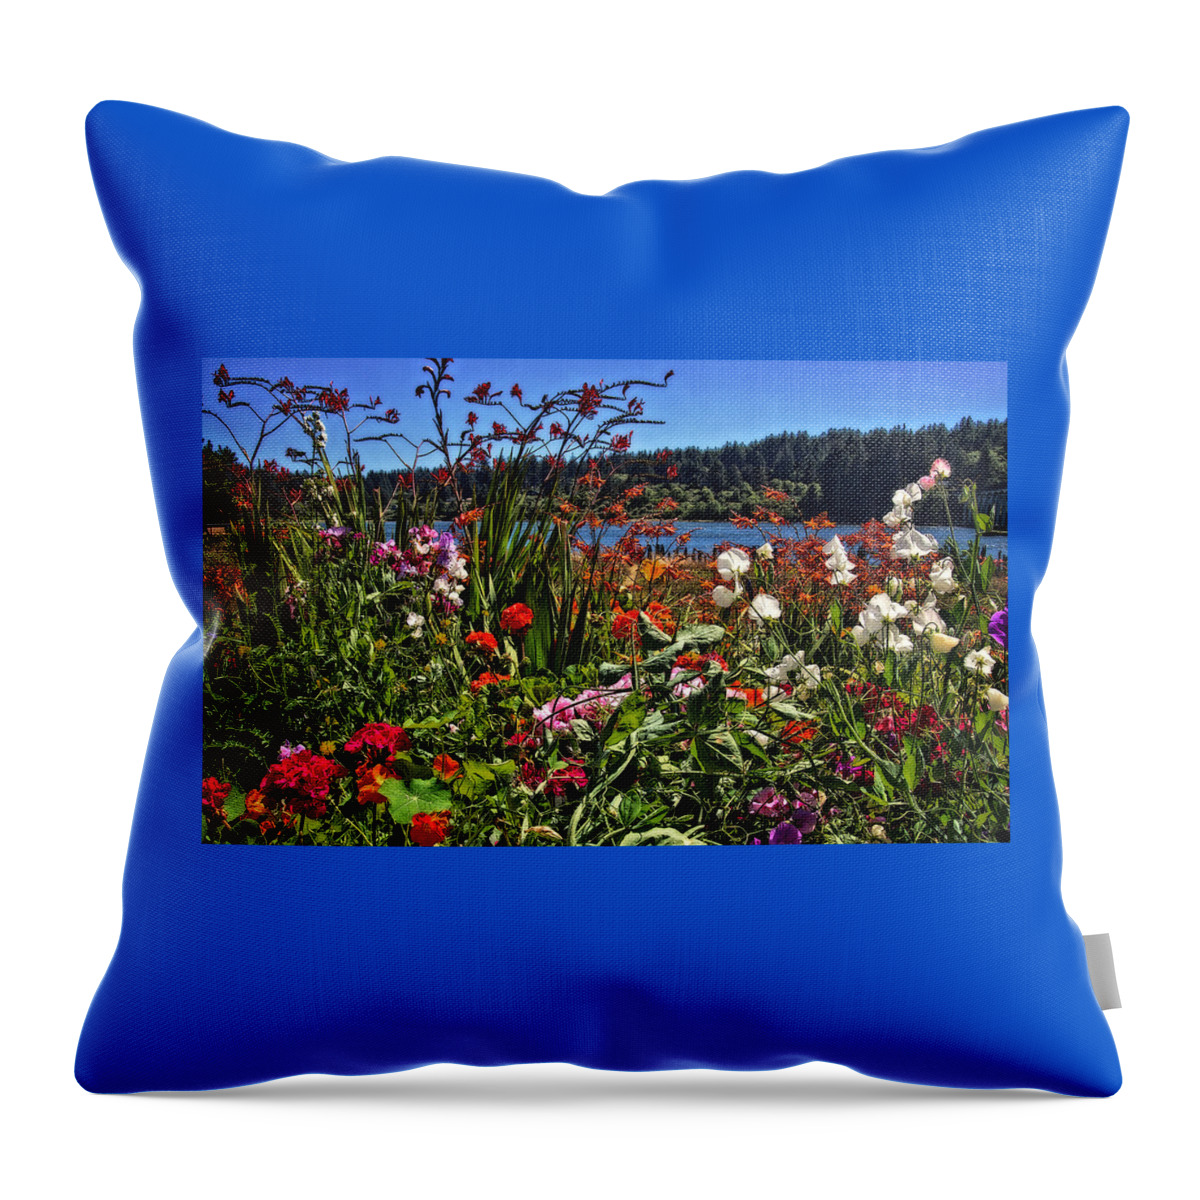 Hdr Throw Pillow featuring the photograph Siuslaw River Floral by Thom Zehrfeld